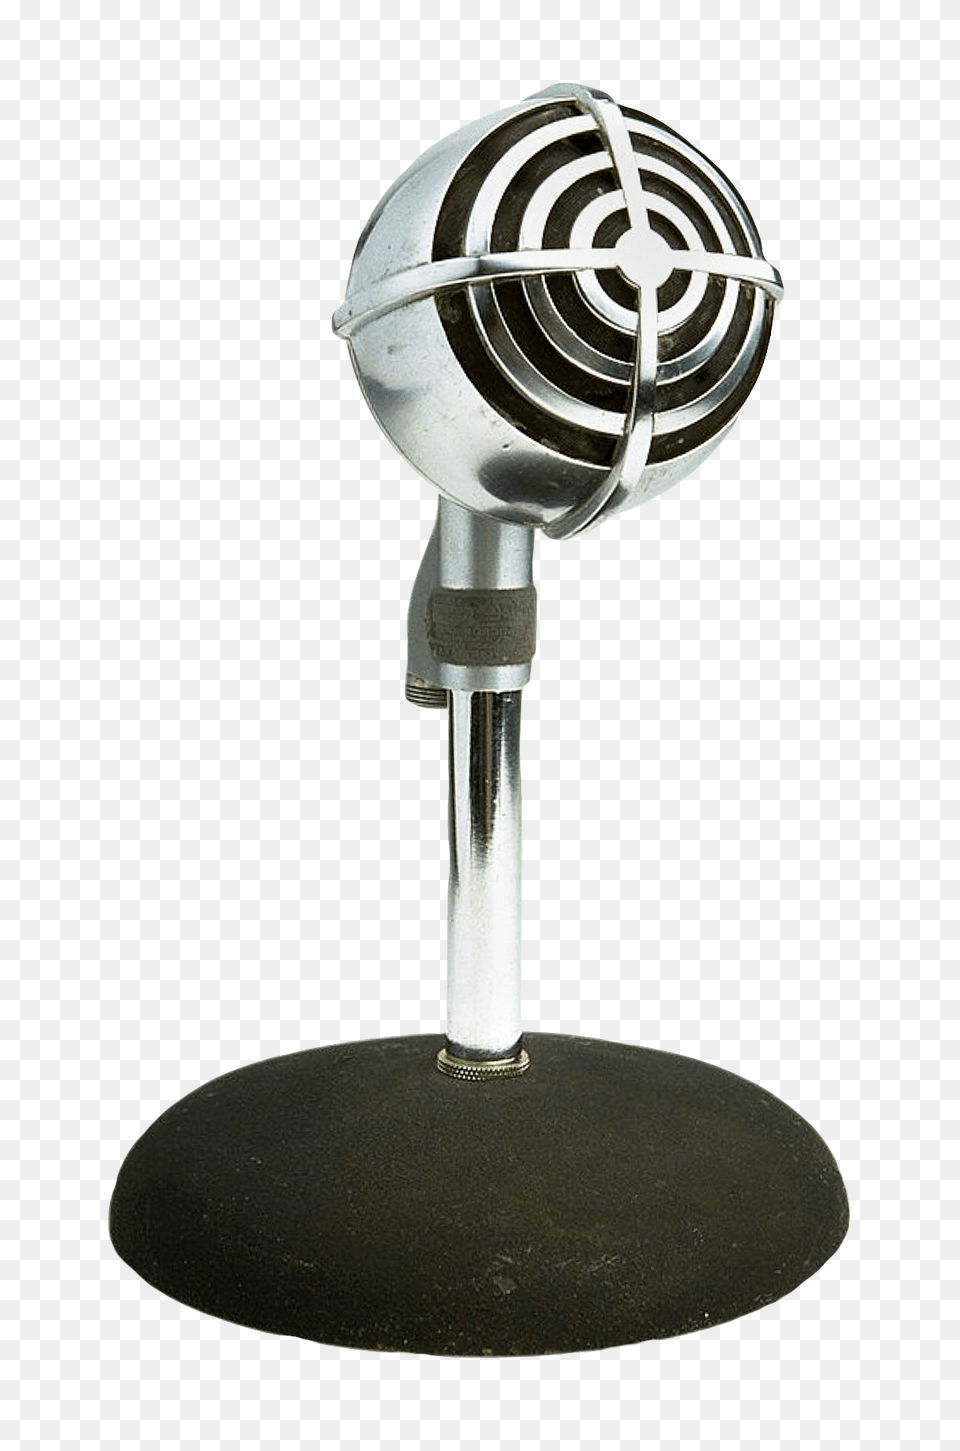 Pngpix Com Retro Style Microphone Image, Electrical Device, Smoke Pipe Png